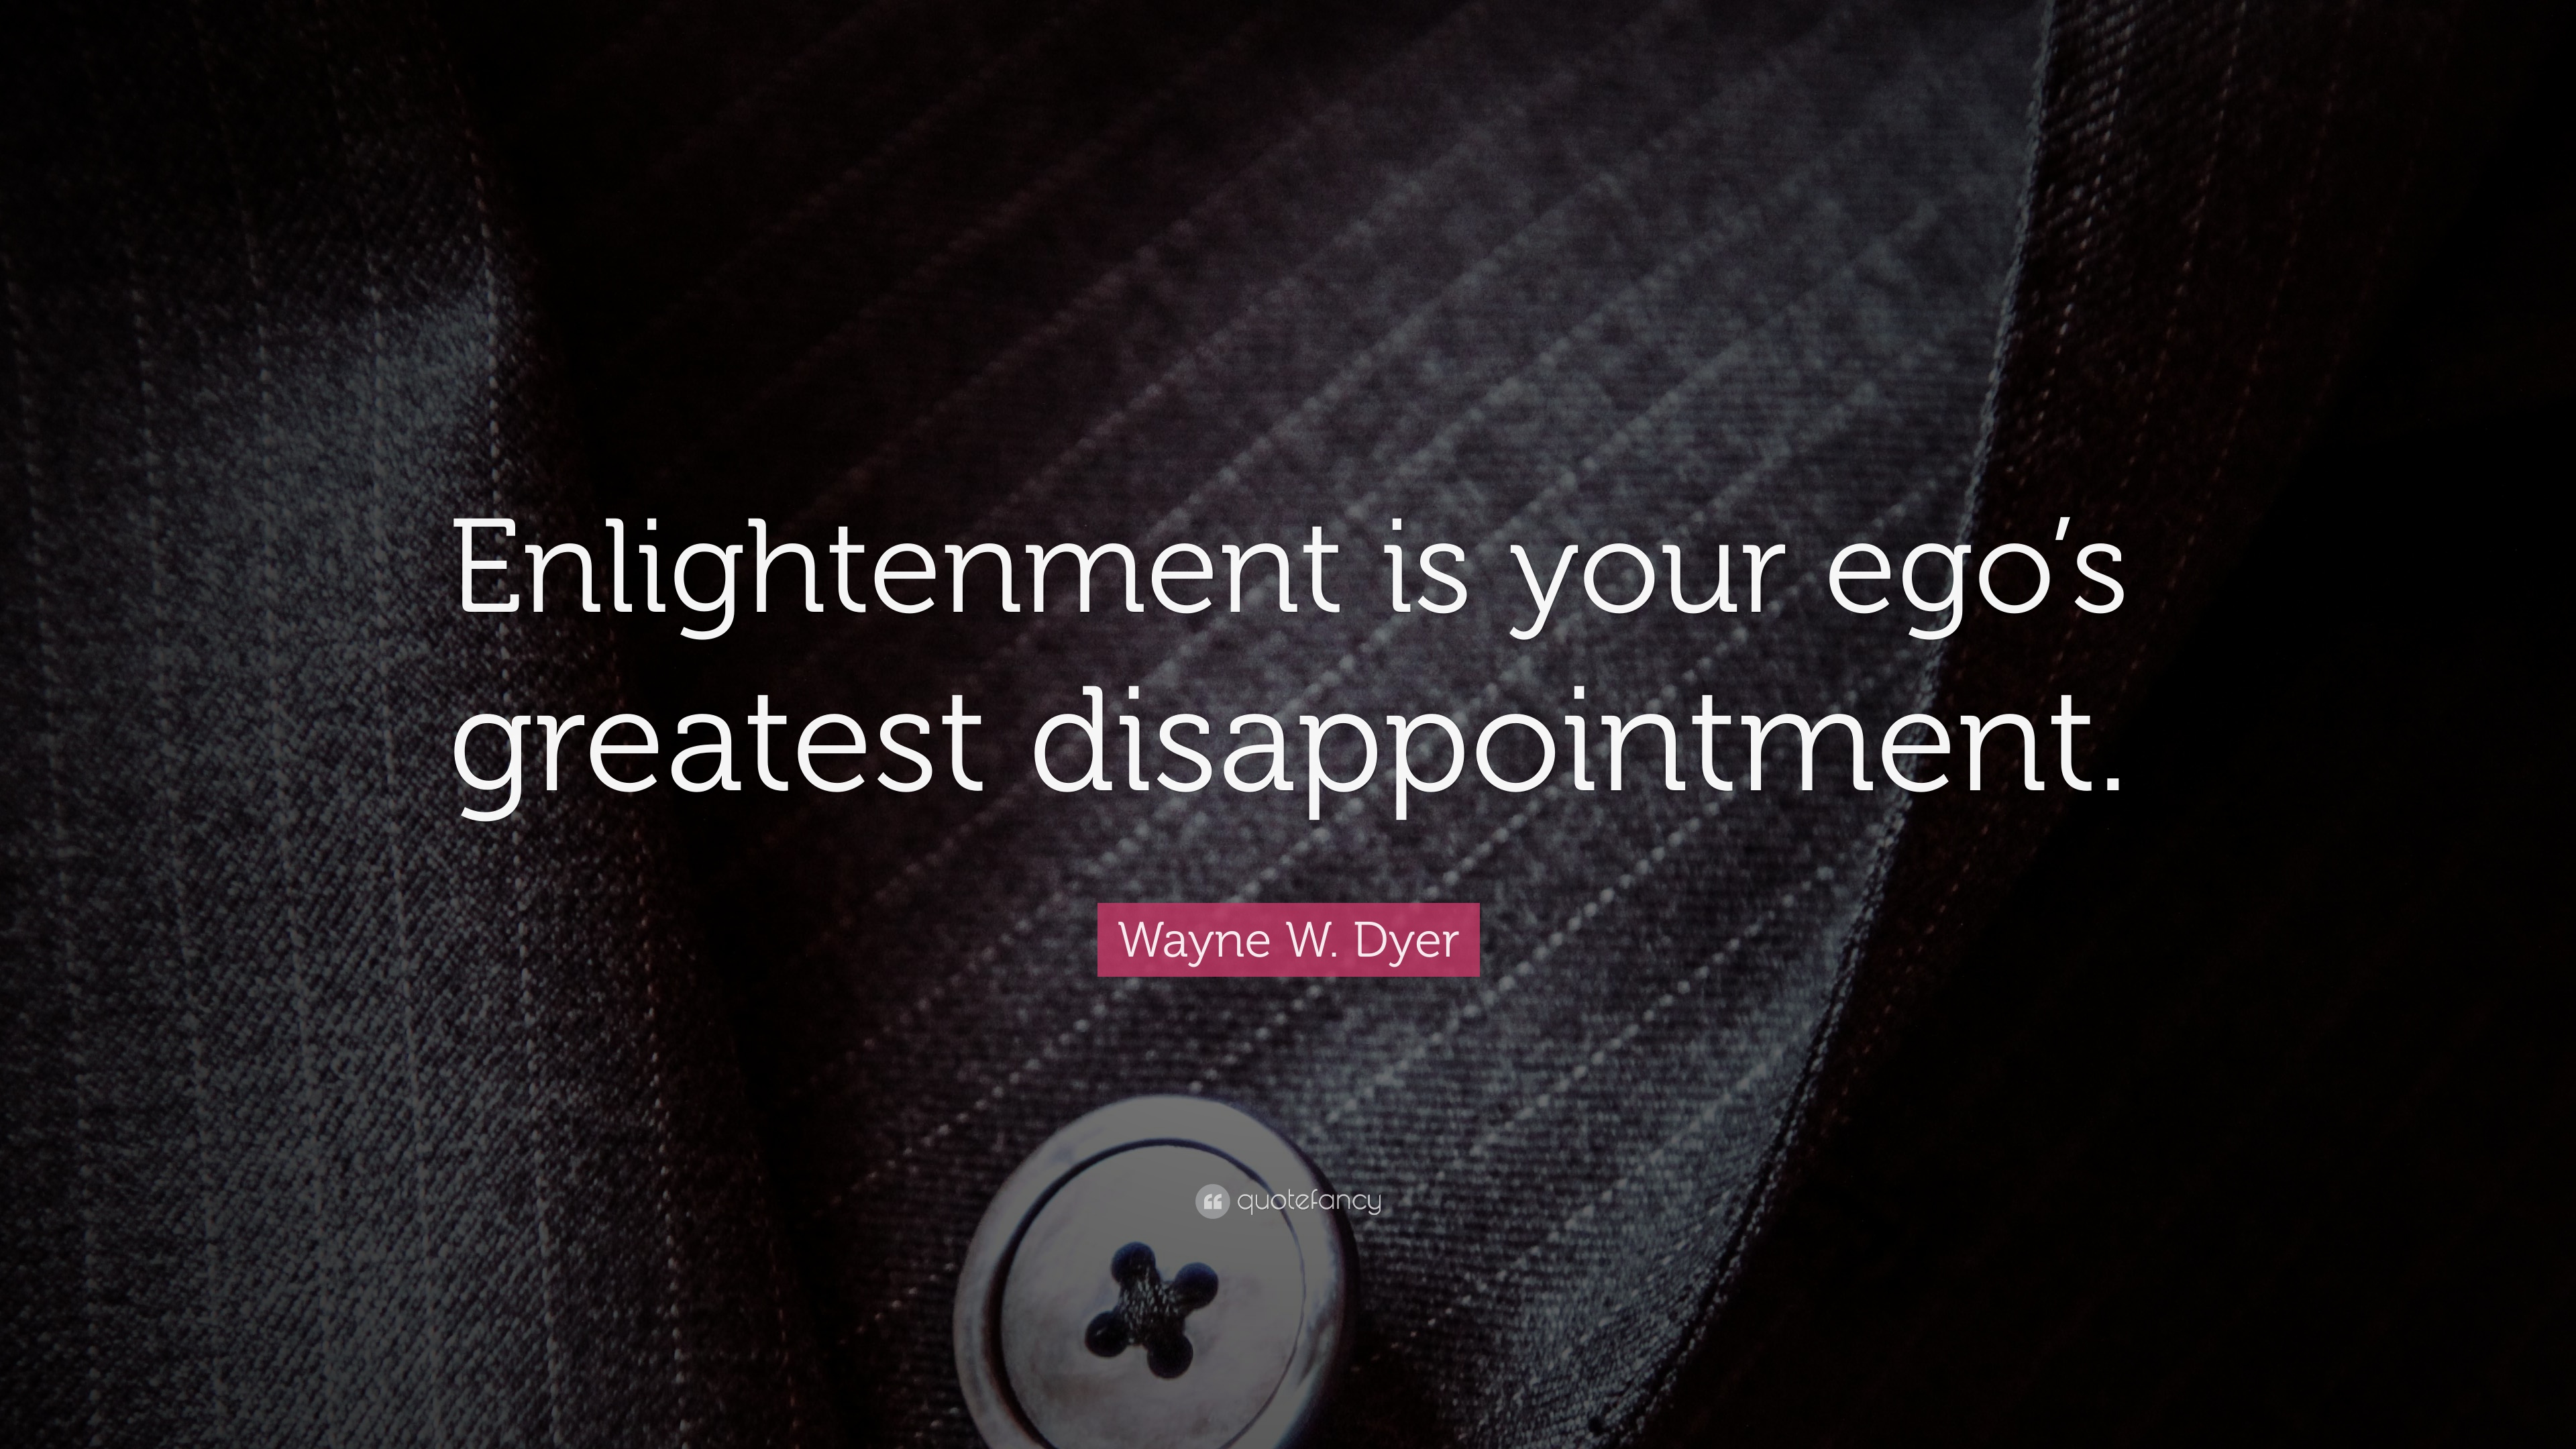 Wayne W. Dyer Quote: “Enlightenment is your ego's greatest